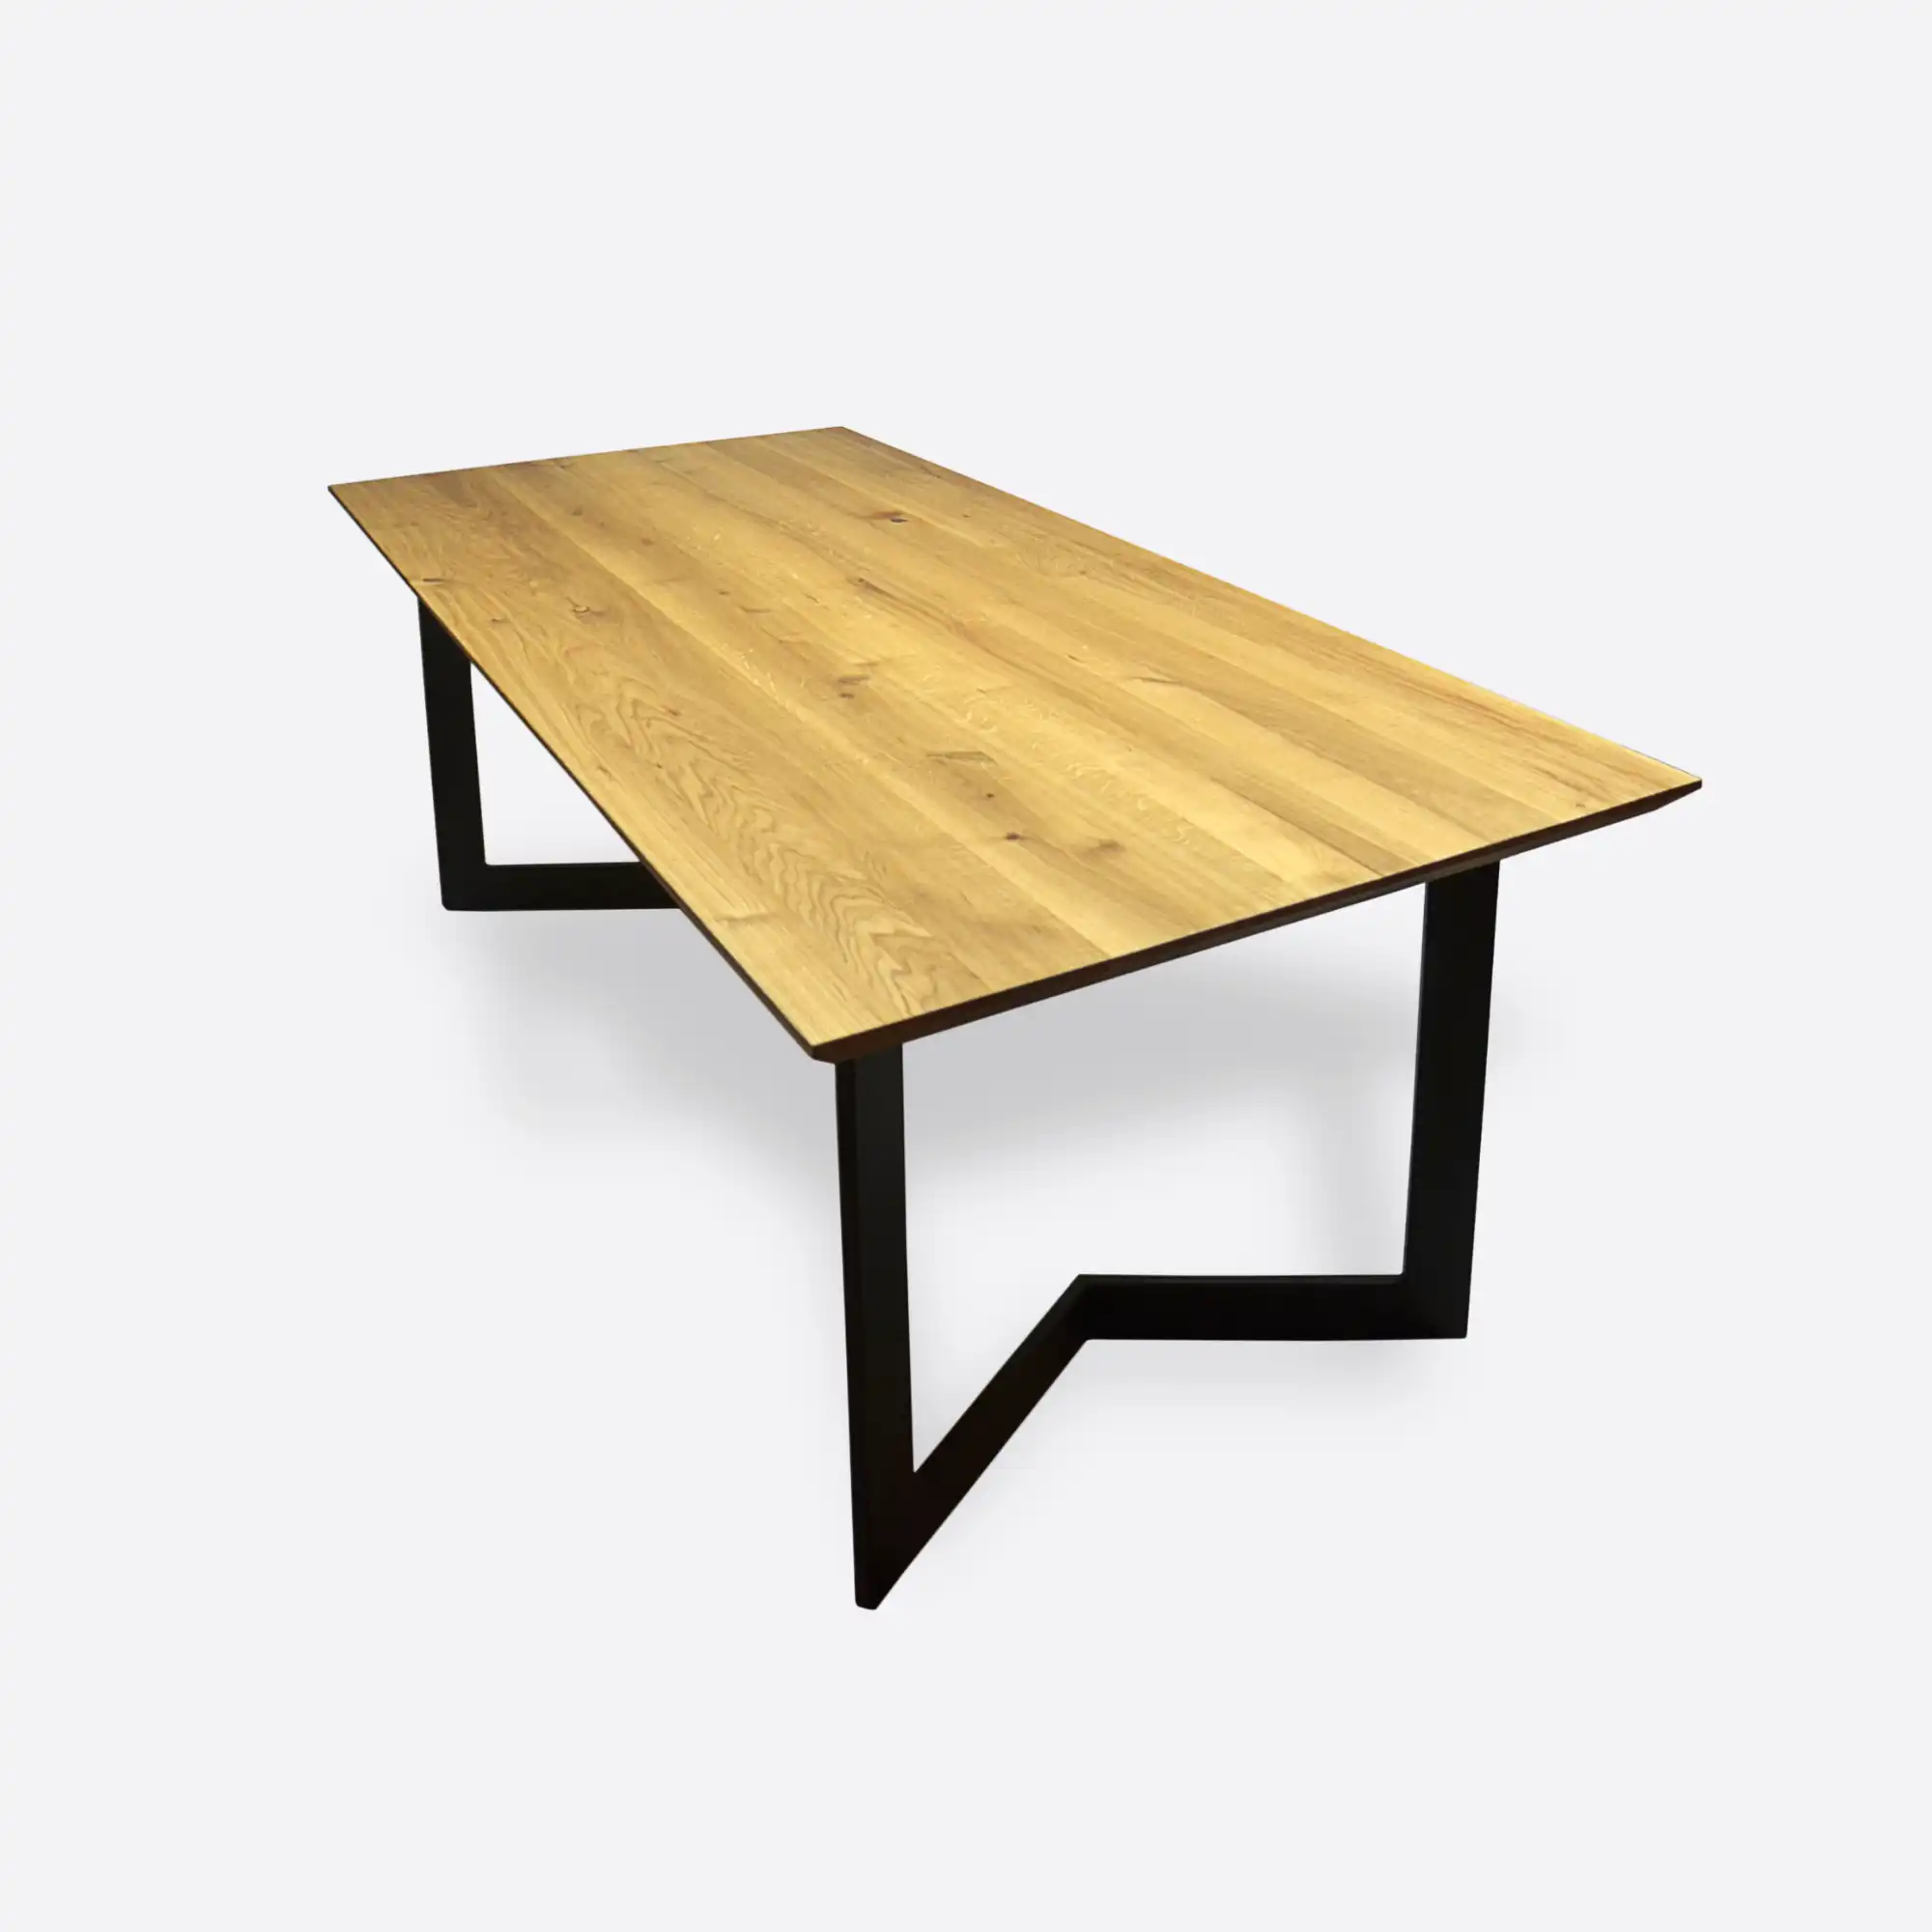 Oak table with metal legs loft GOVER